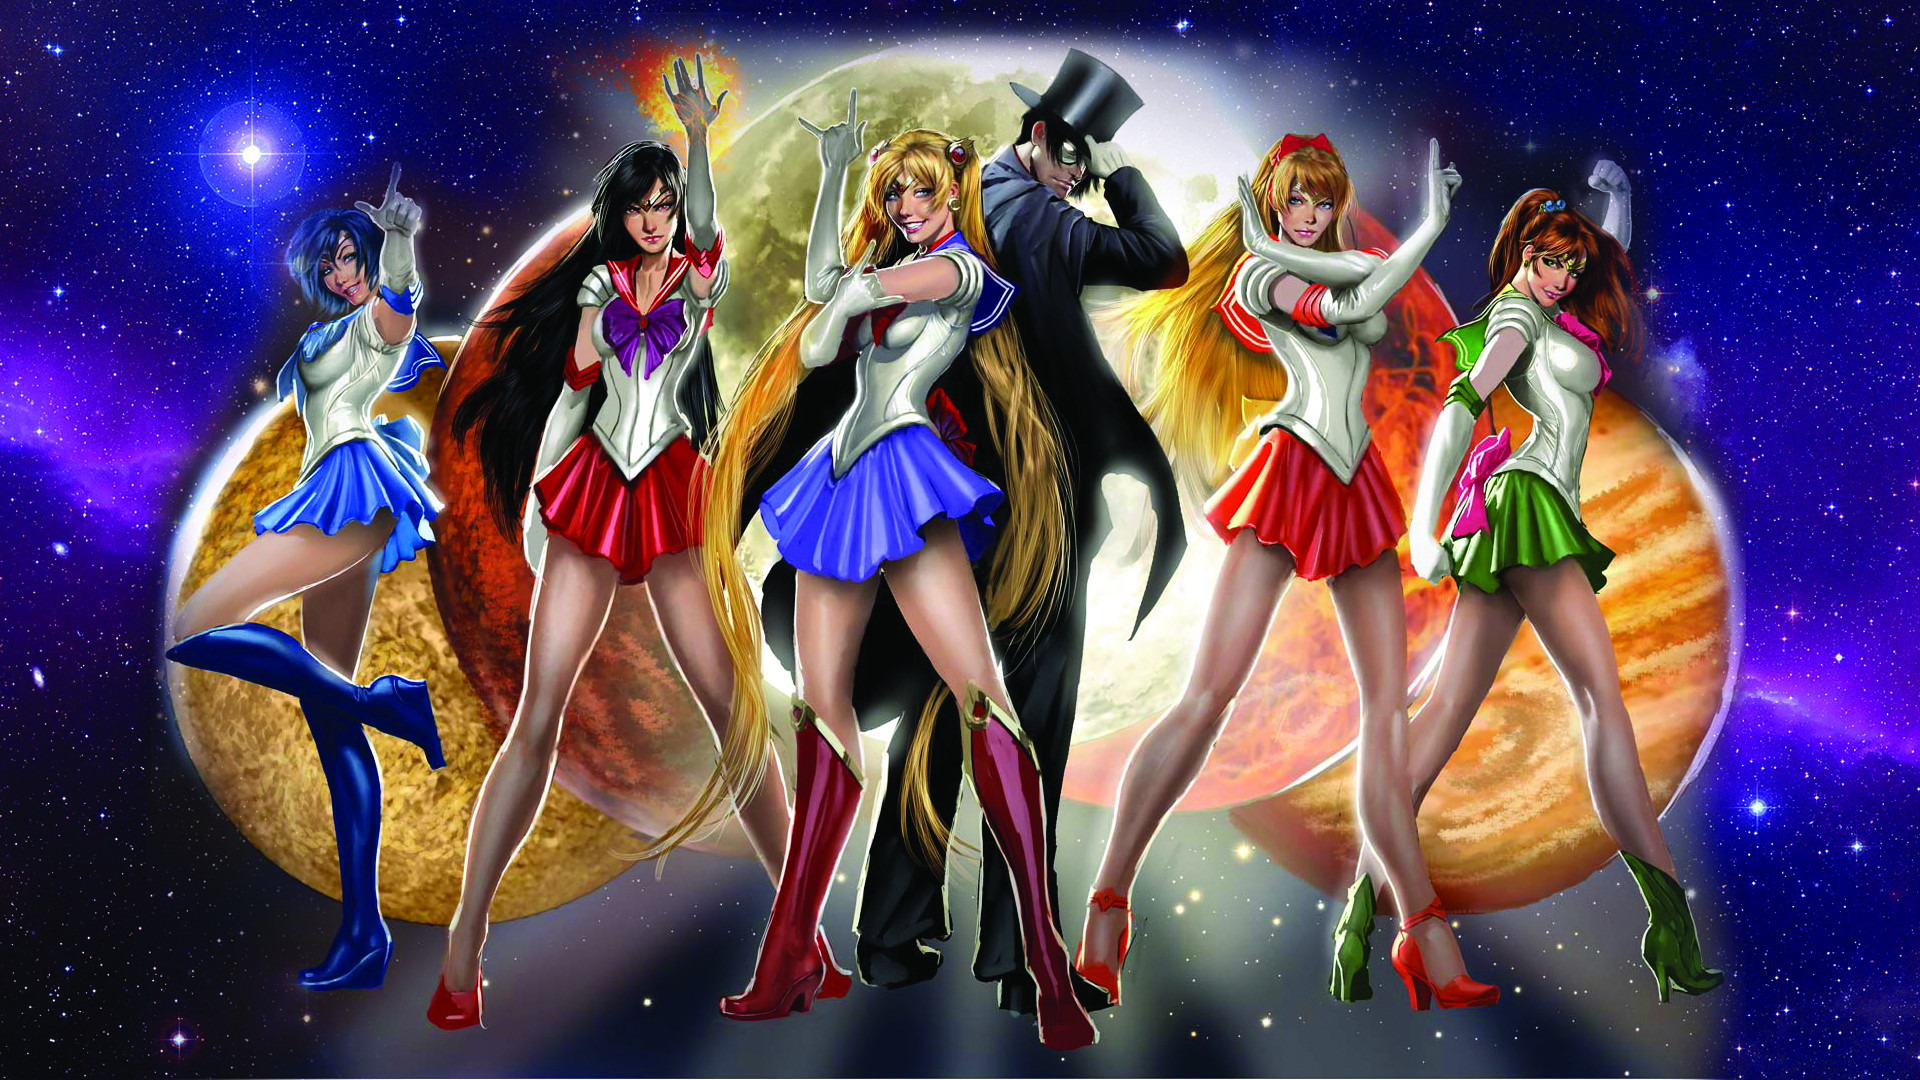 1920x1080 Sailor Moon HD Wallpapers - Wallpaper, High Definition, High Quality .